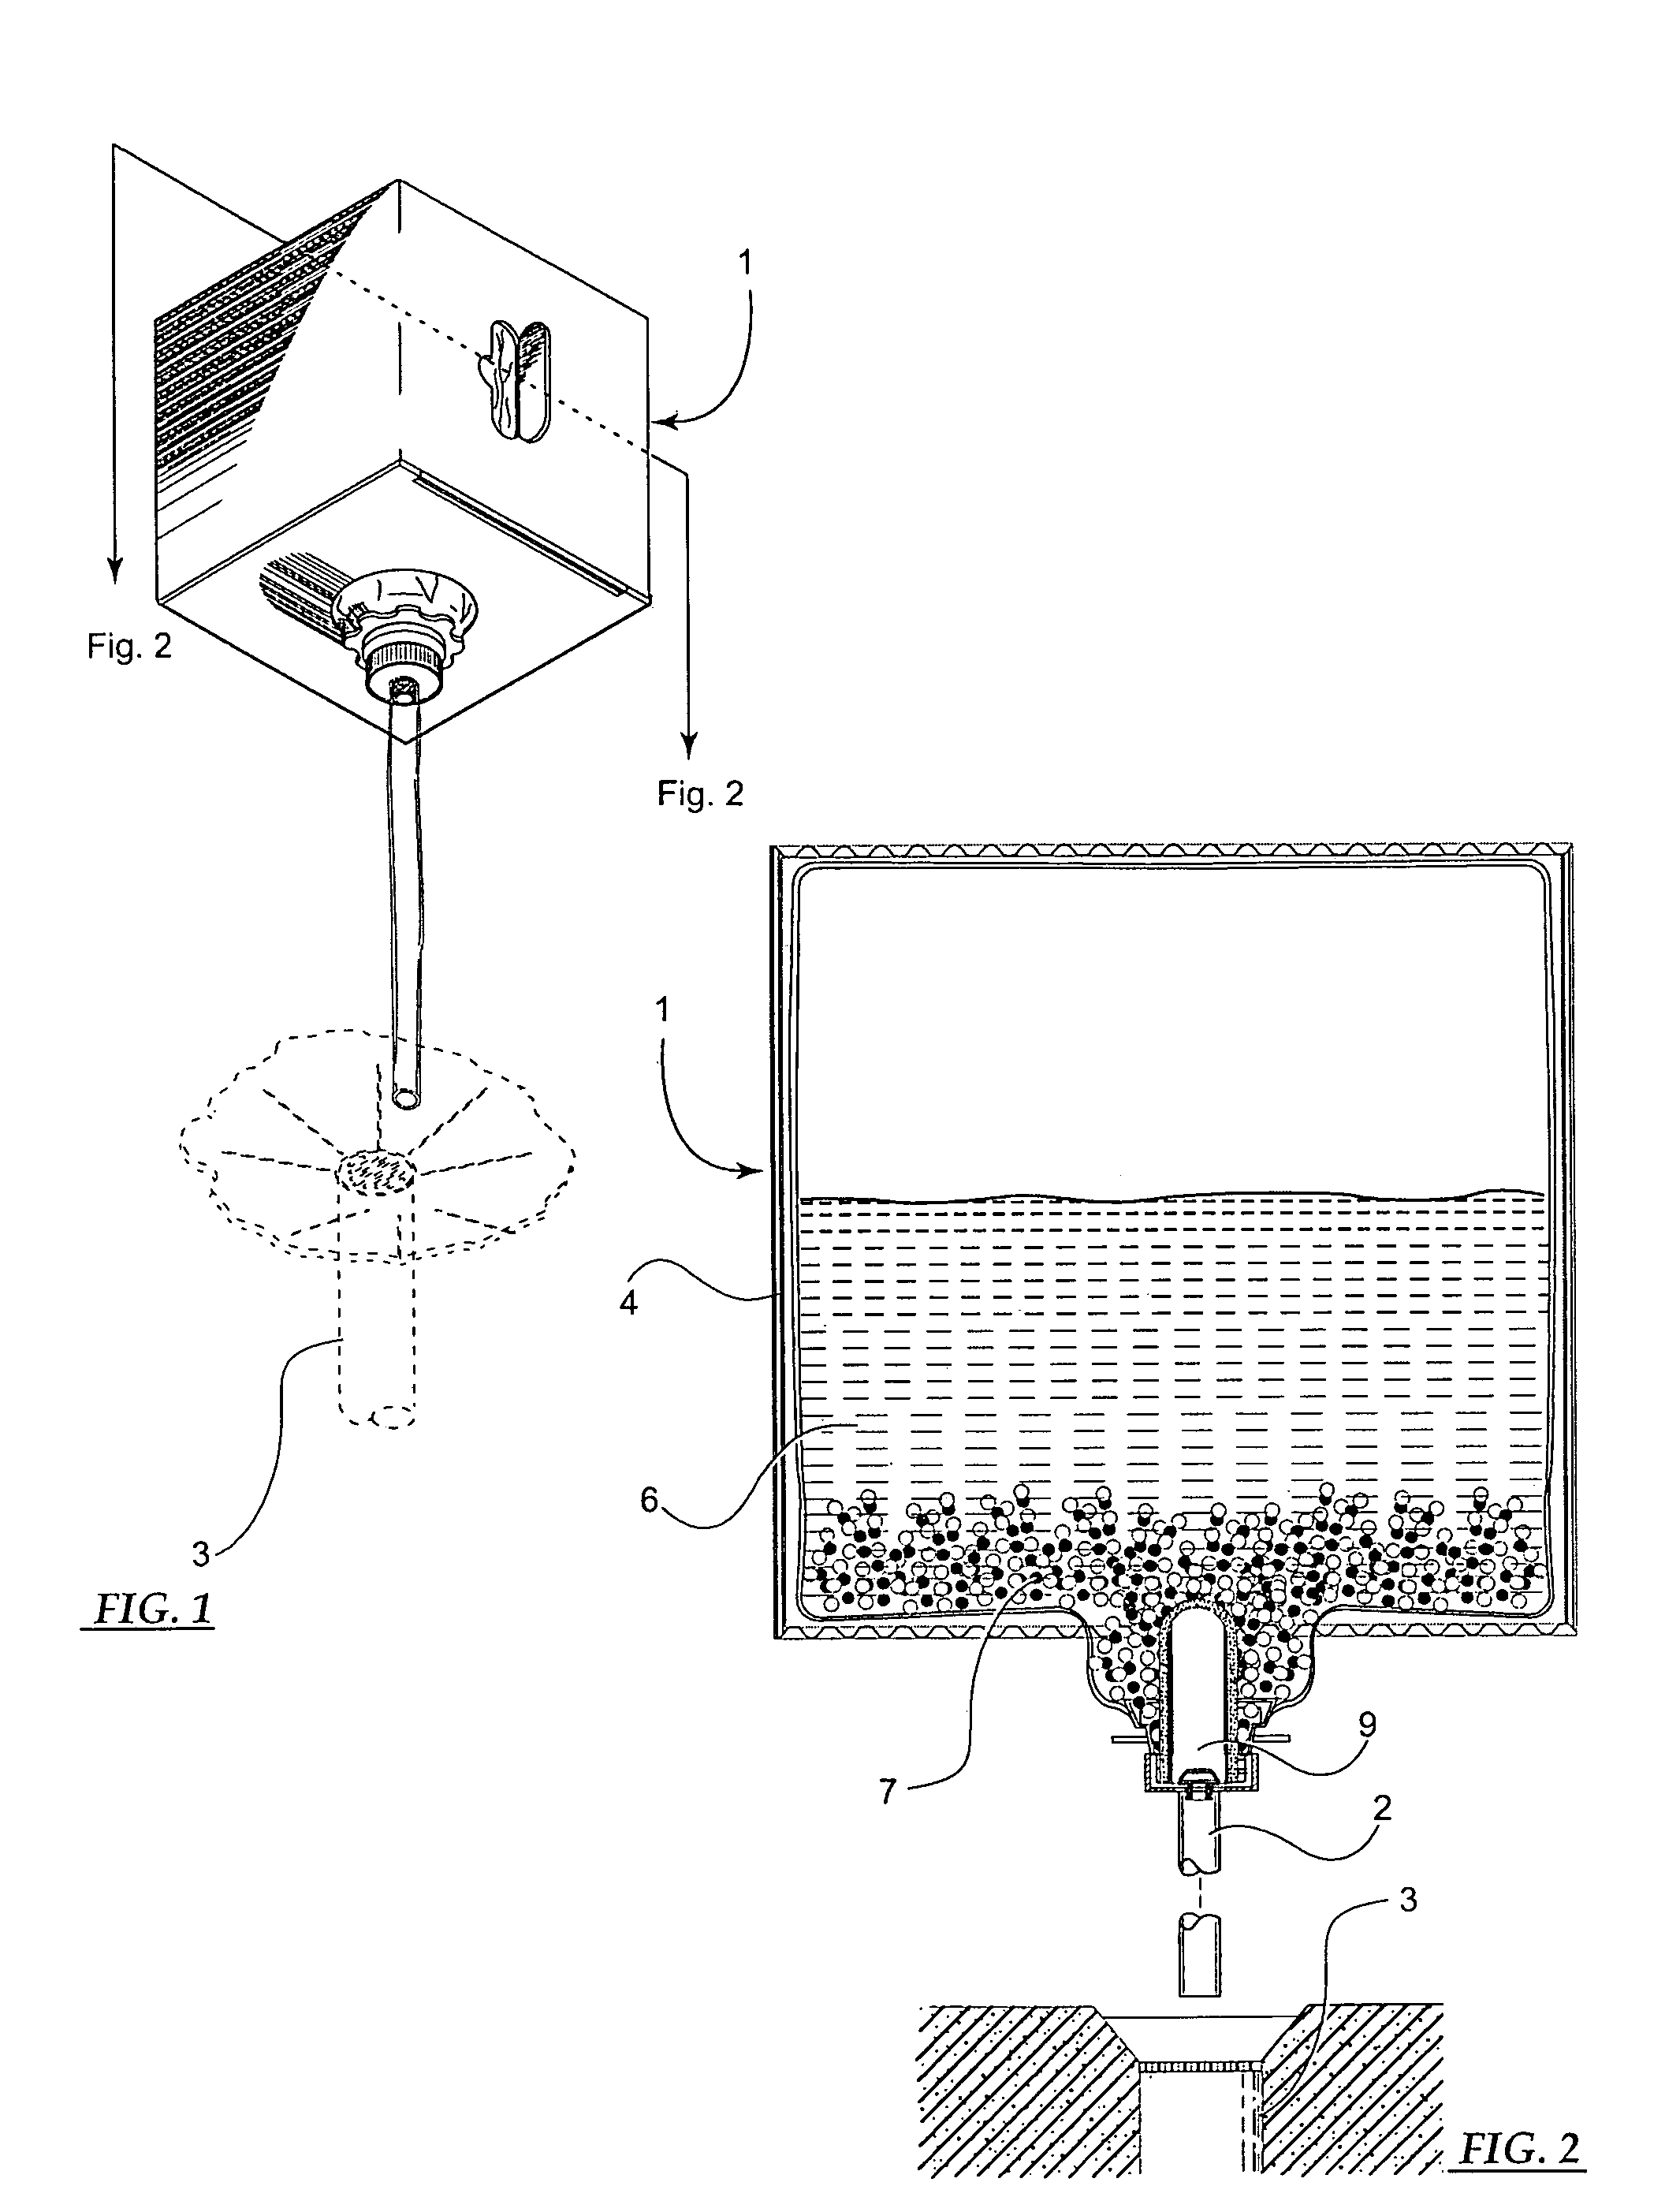 Apparatus and method for remediation of a waste stream